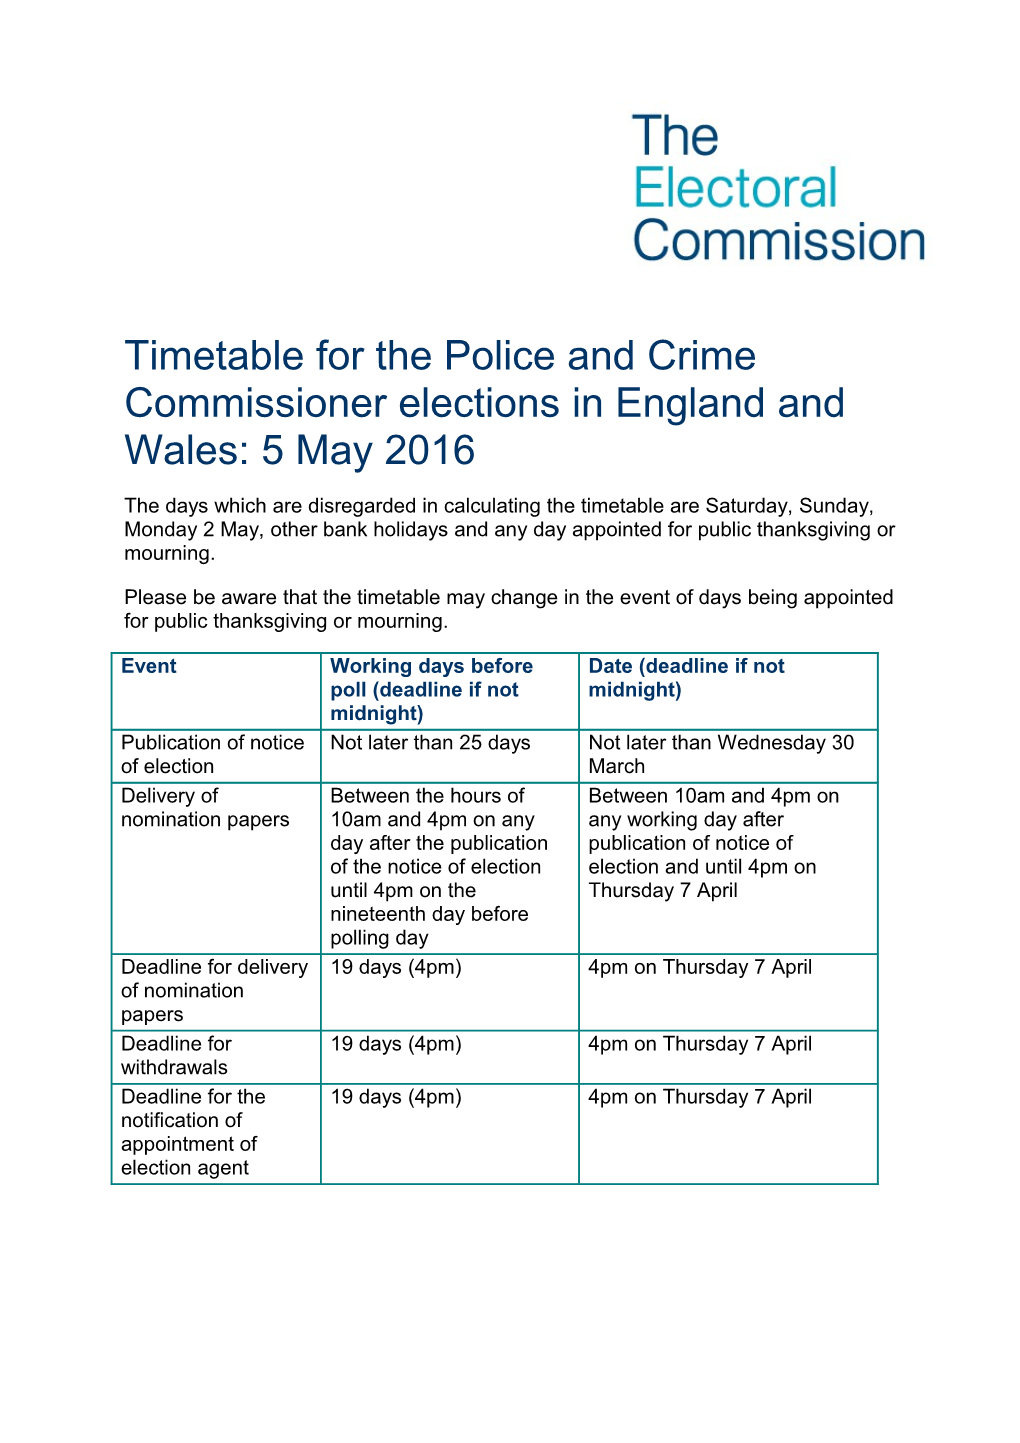 Timetable for the Police and Crime Commissioner Elections in England and Wales: 5 May 2016